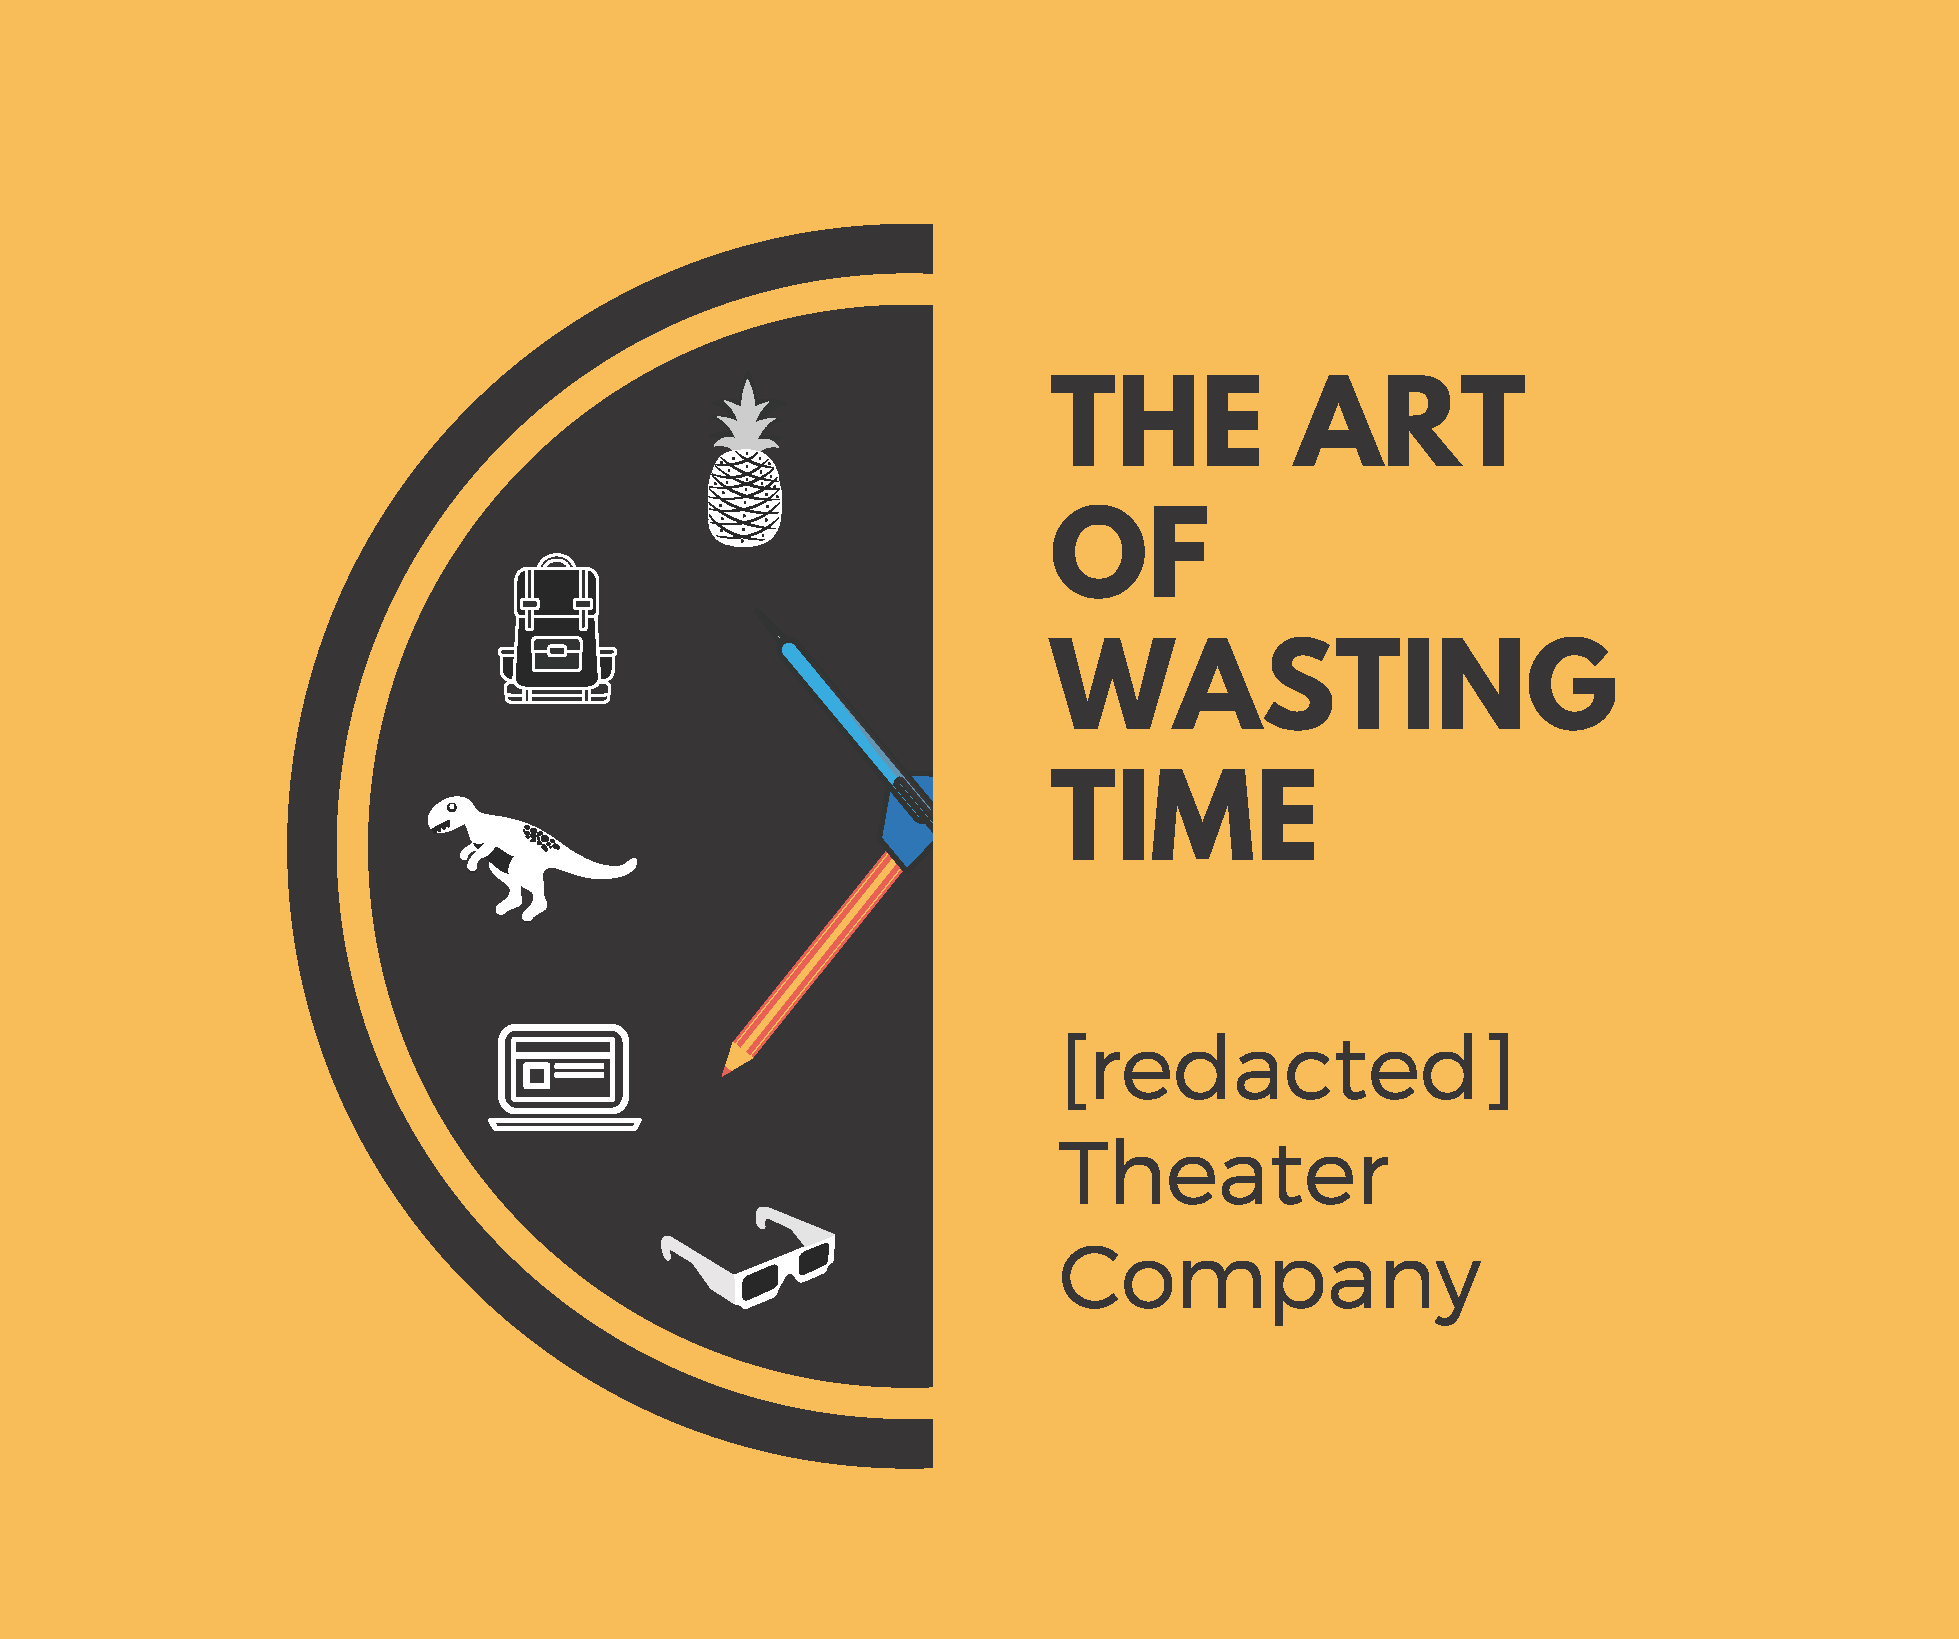 The Art of Wasting Time